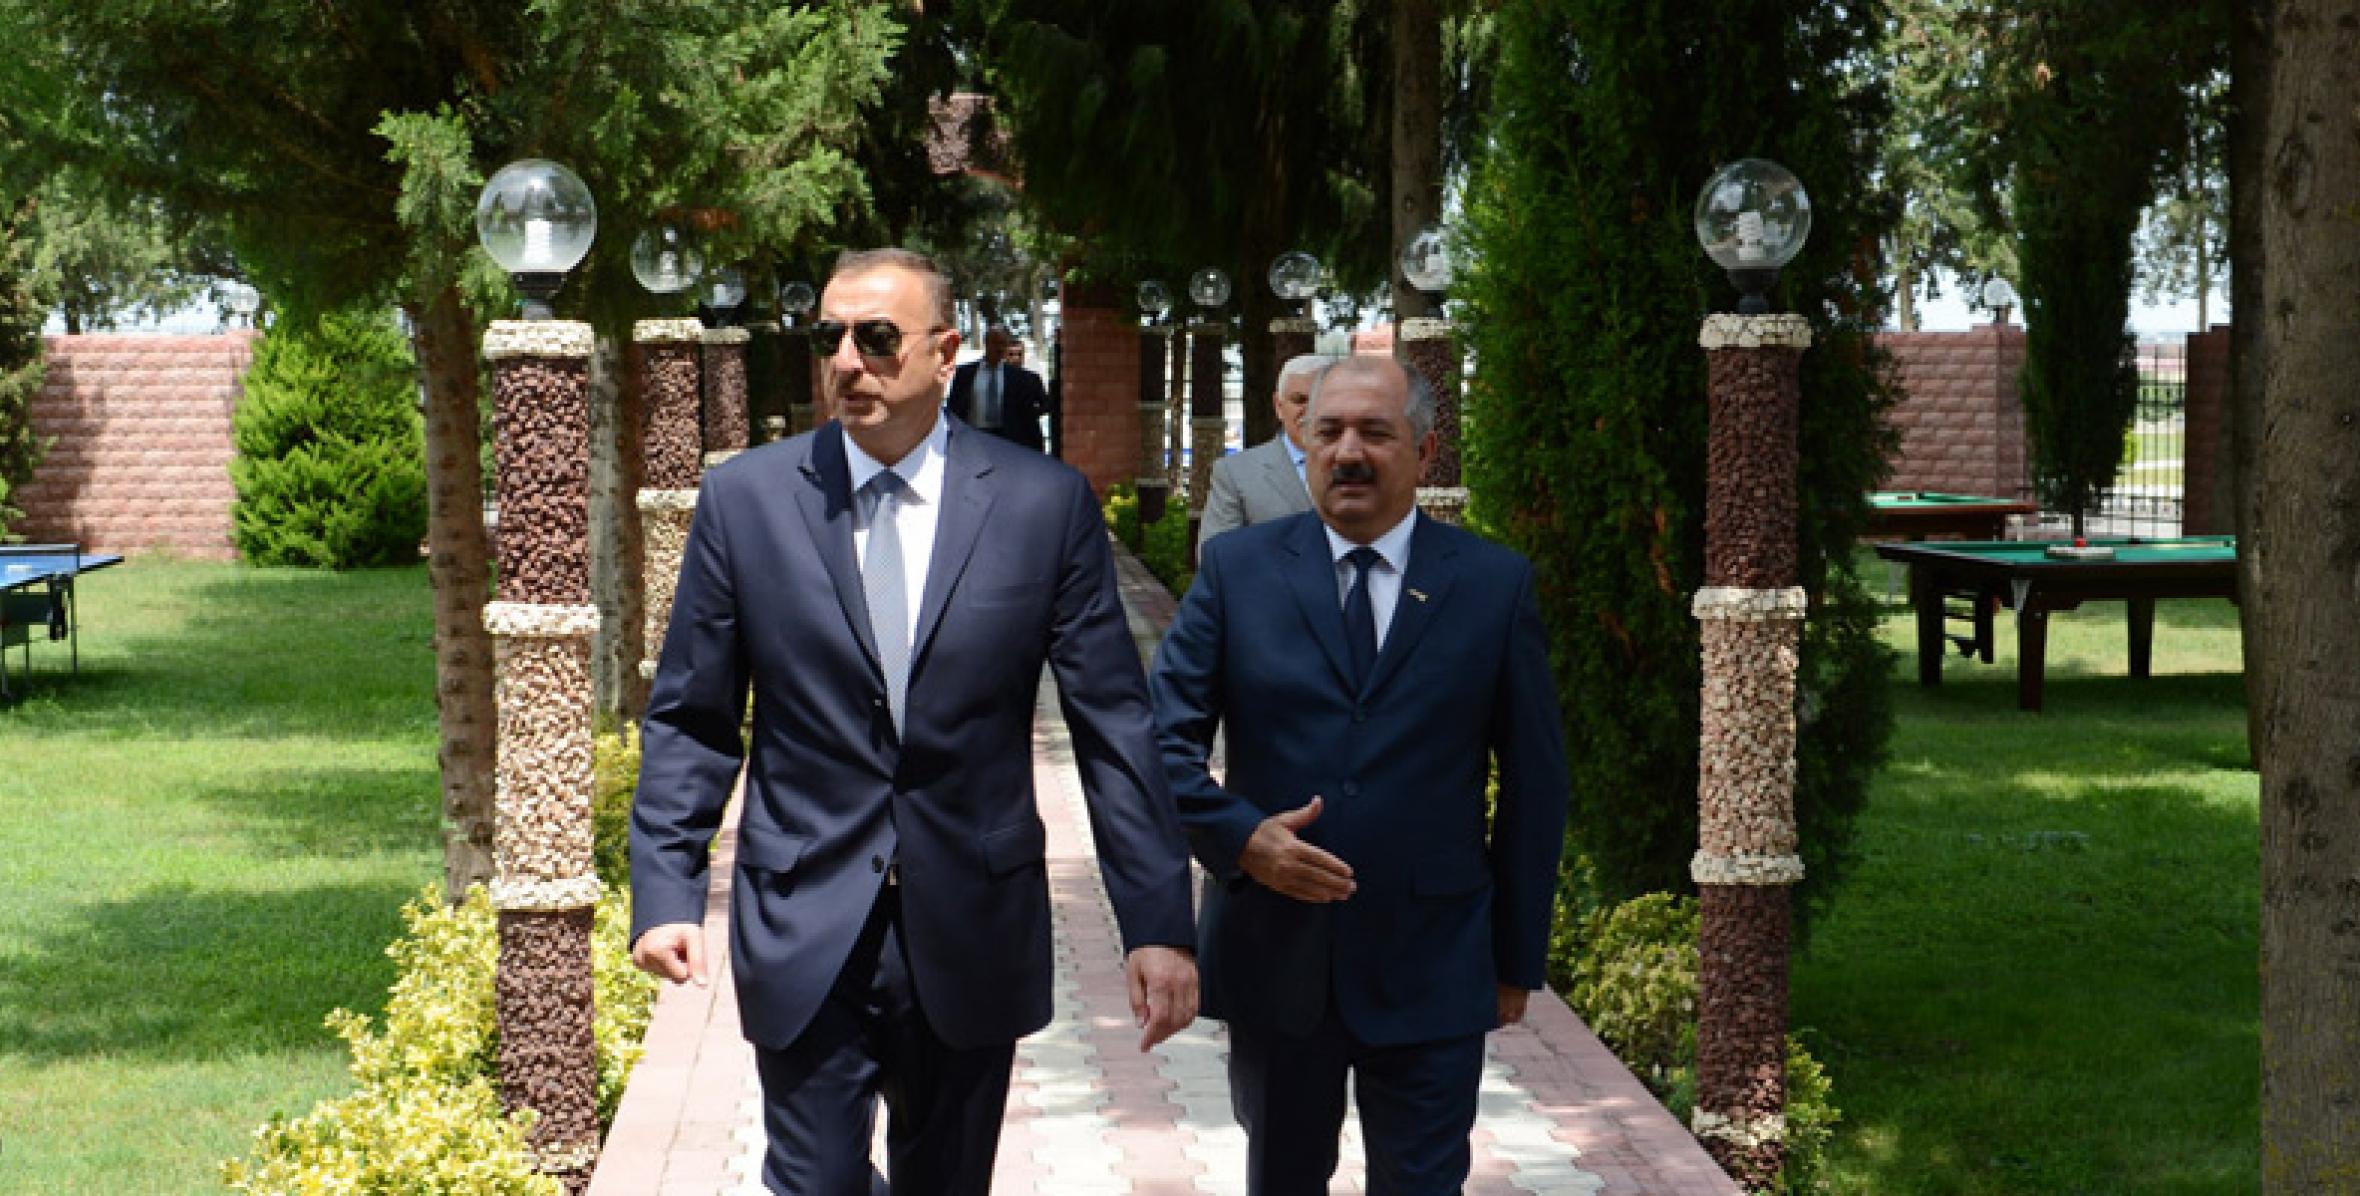 Ilham Aliyev reviewed the reconstructed Youth Park and the Flag Square in Jalilabad